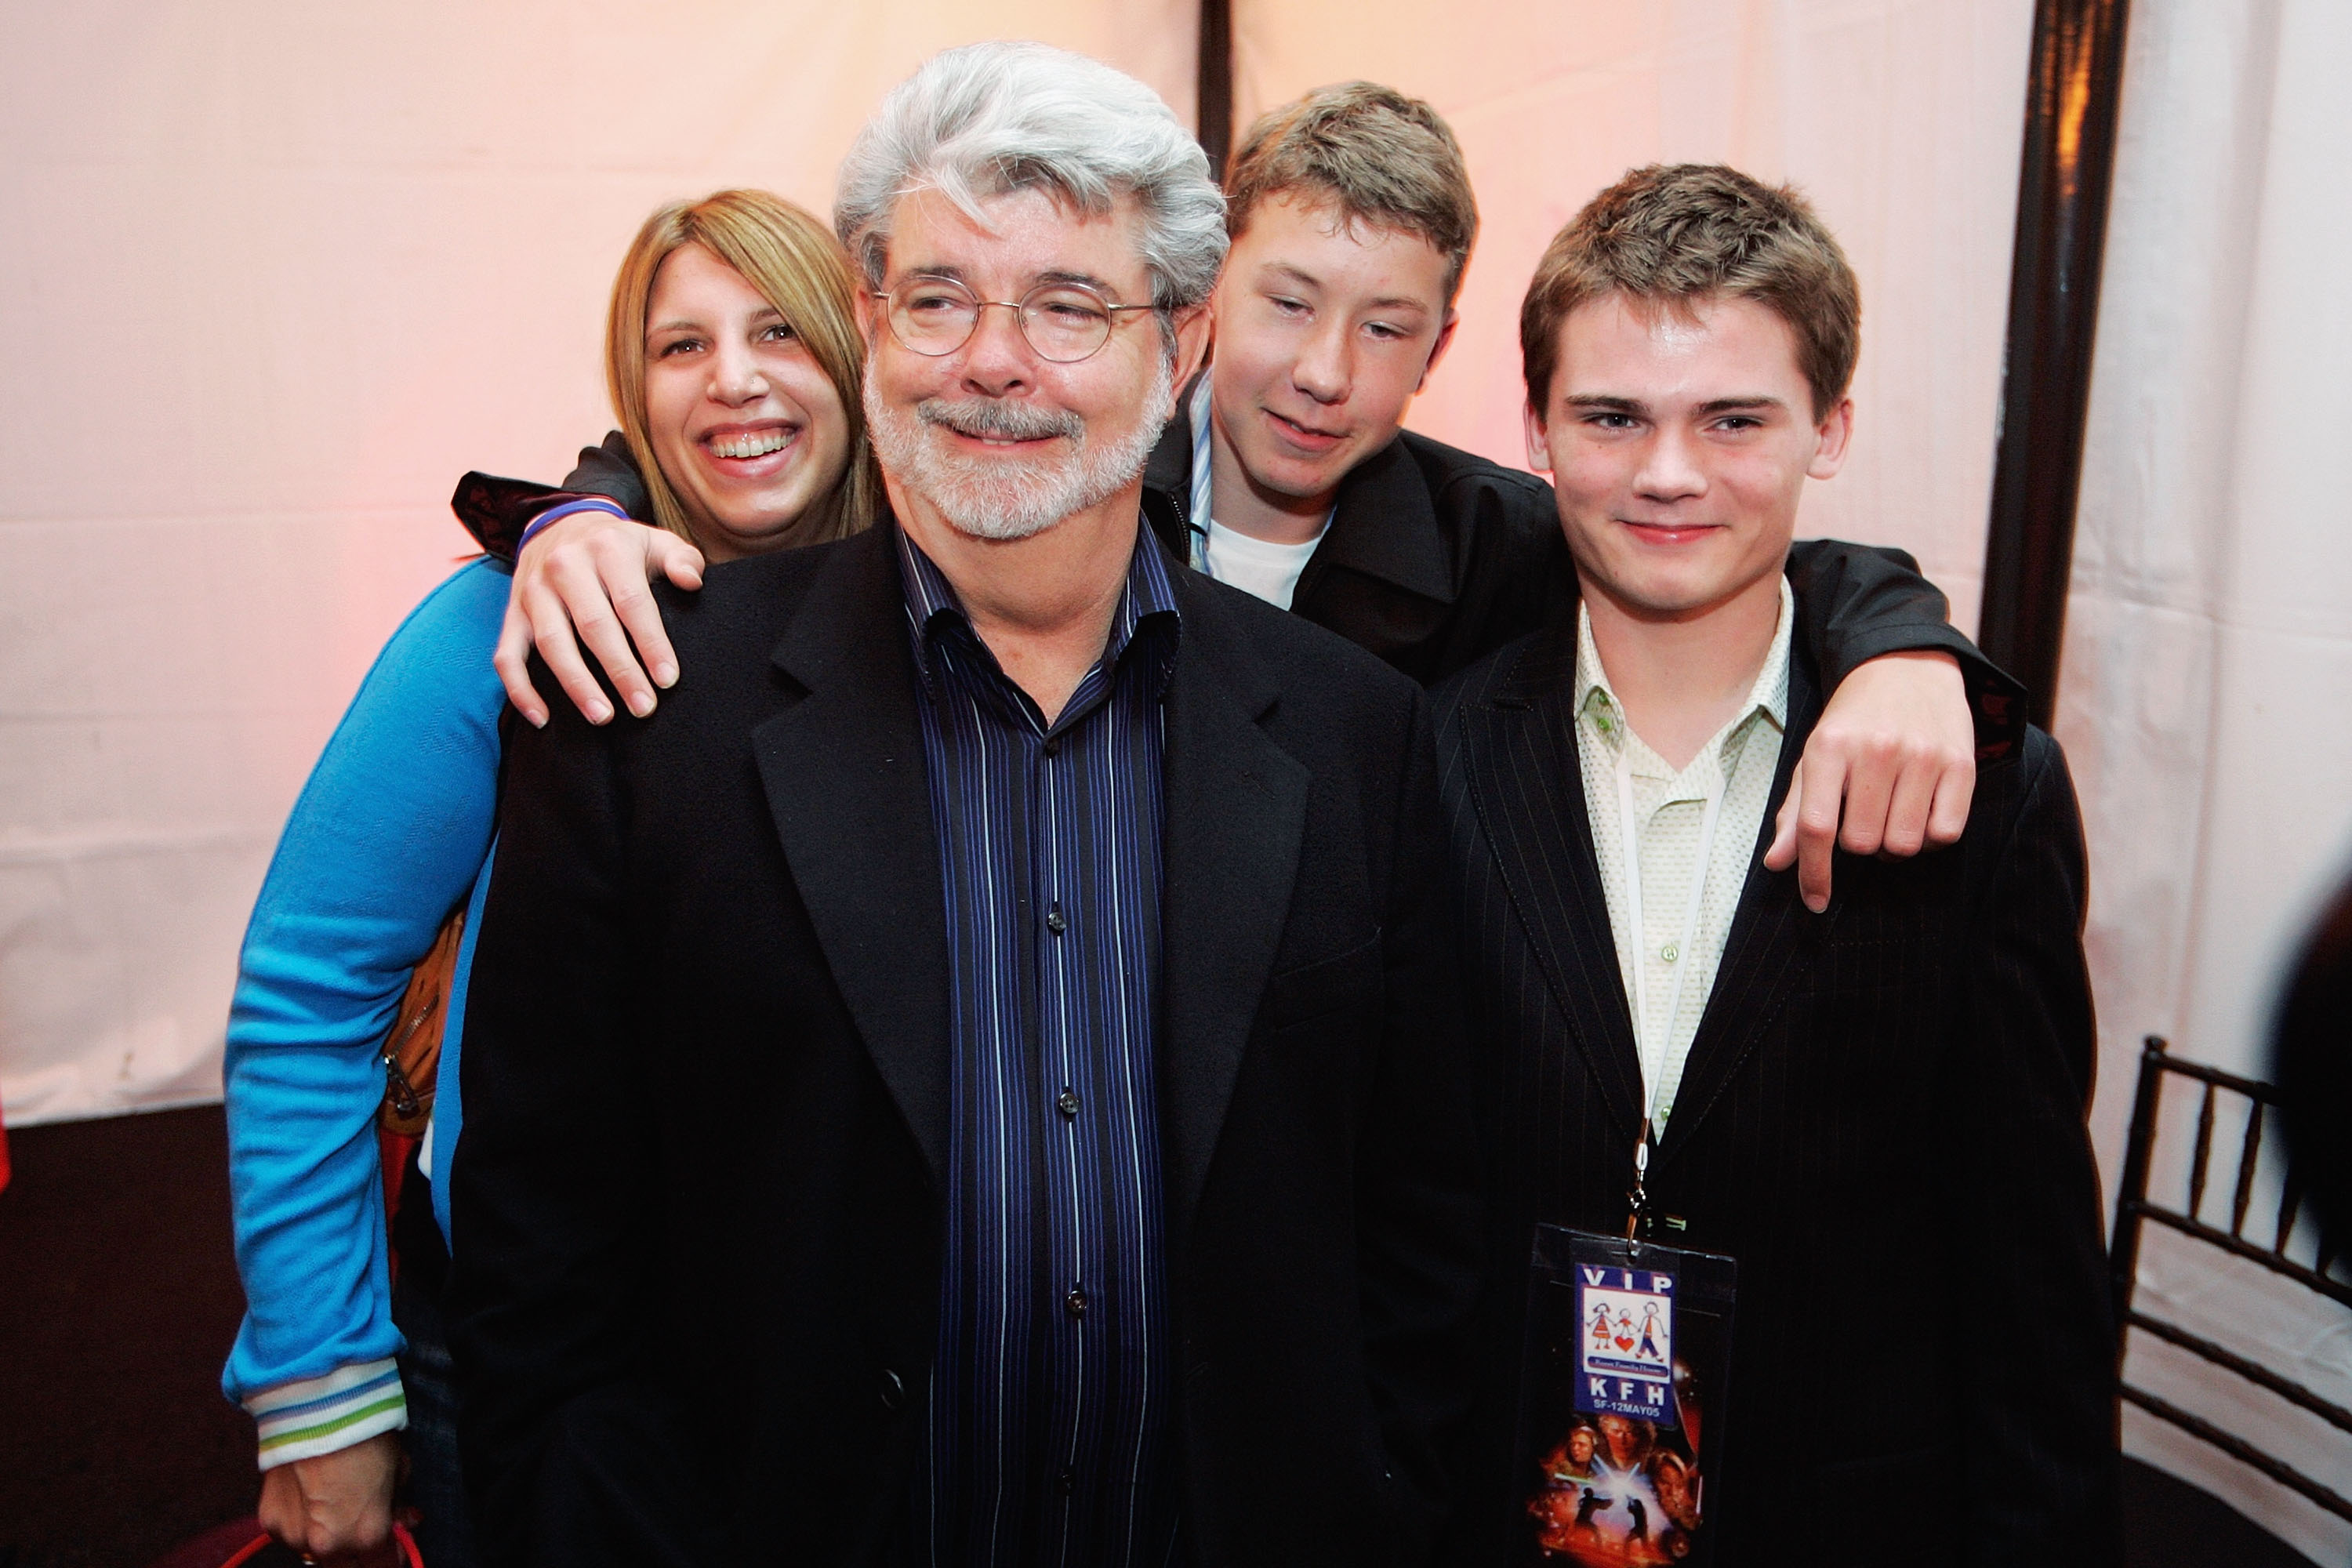 George Lucas director of Star Wars, Amanda Lucas, Jett Lucas and Jake Lloyd attend the after party of the world premiere of "Star Wars: Episode III - Revenge of the Sith"  on May 12, 2005 in San Francisco, California | Source: Getty images